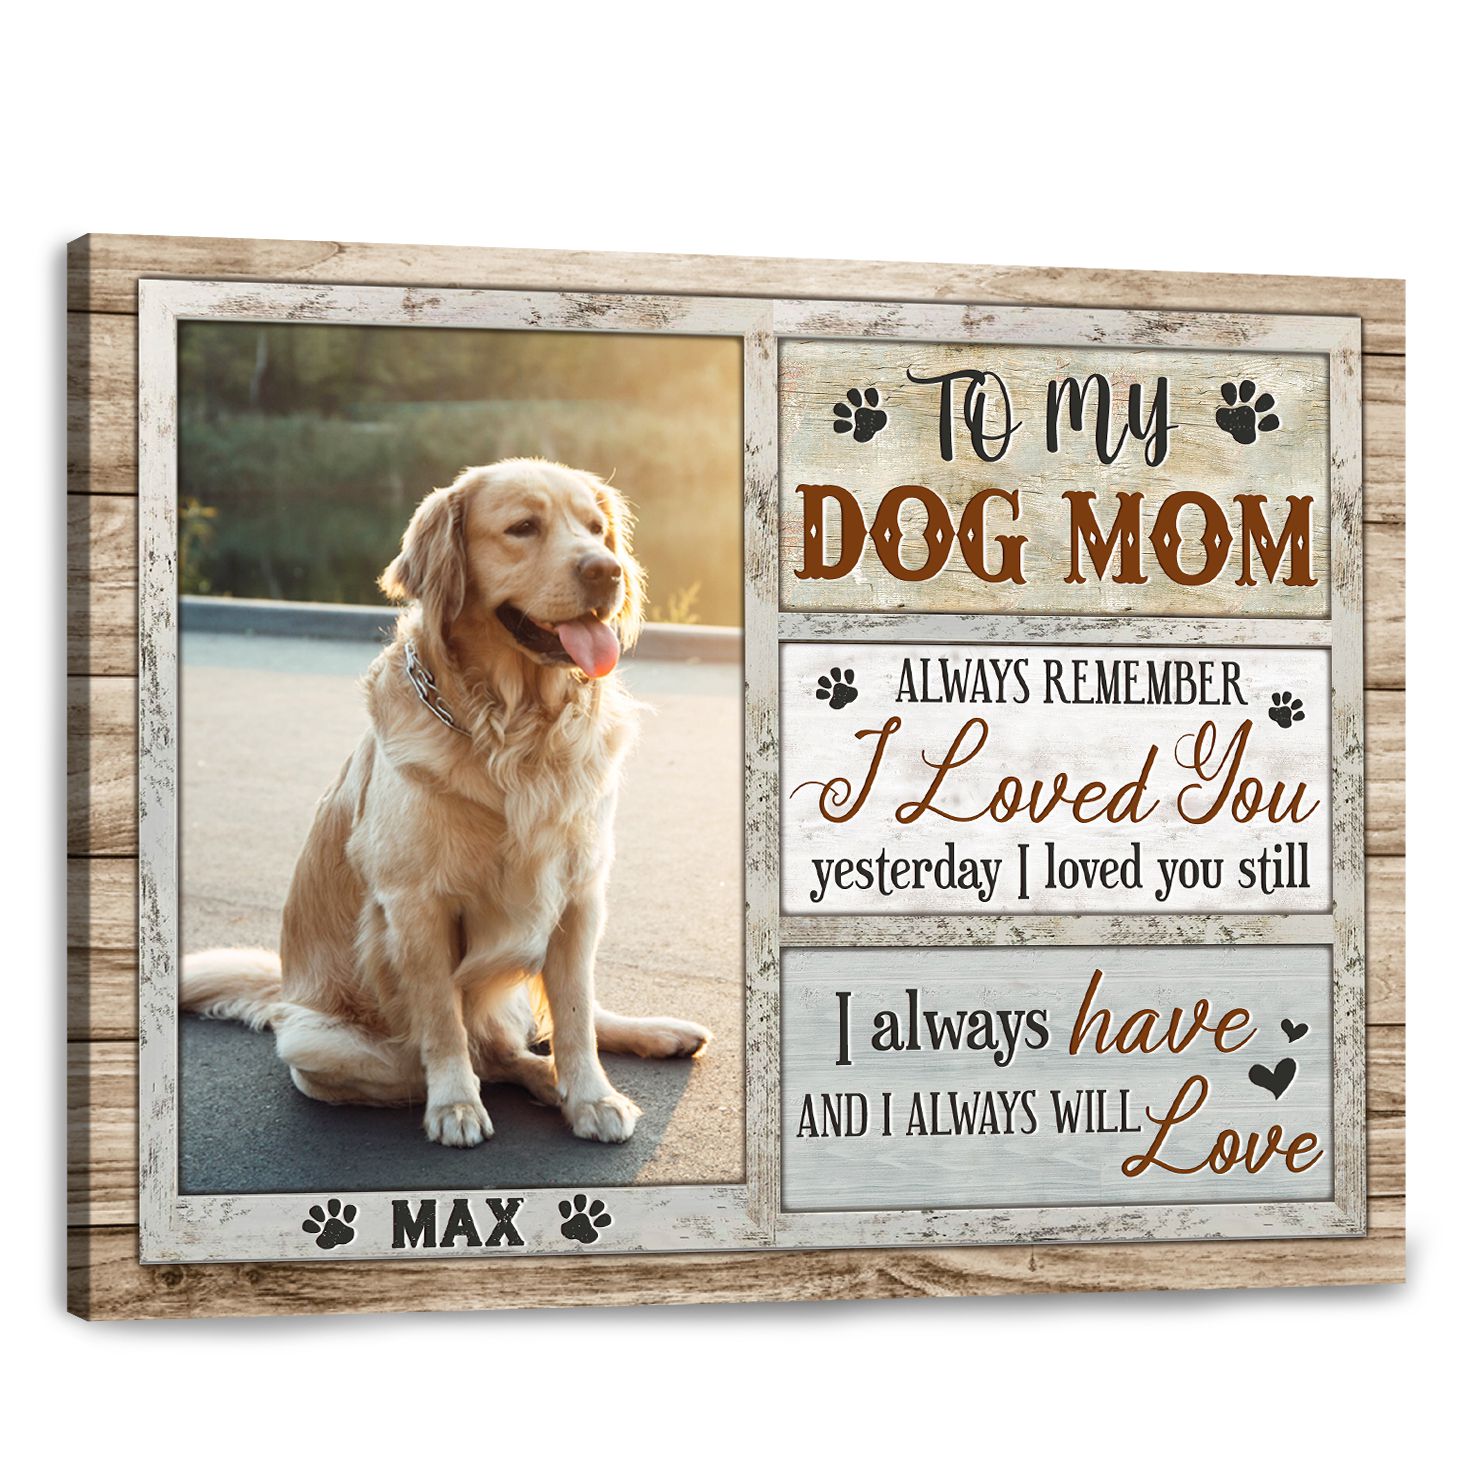 https://images.ohcanvas.com/ohcanvas_com/2022/03/09180936/personalized-gift-for-dog-mom-always-remember-i-loved-you-yesterday-canvas-print.jpg